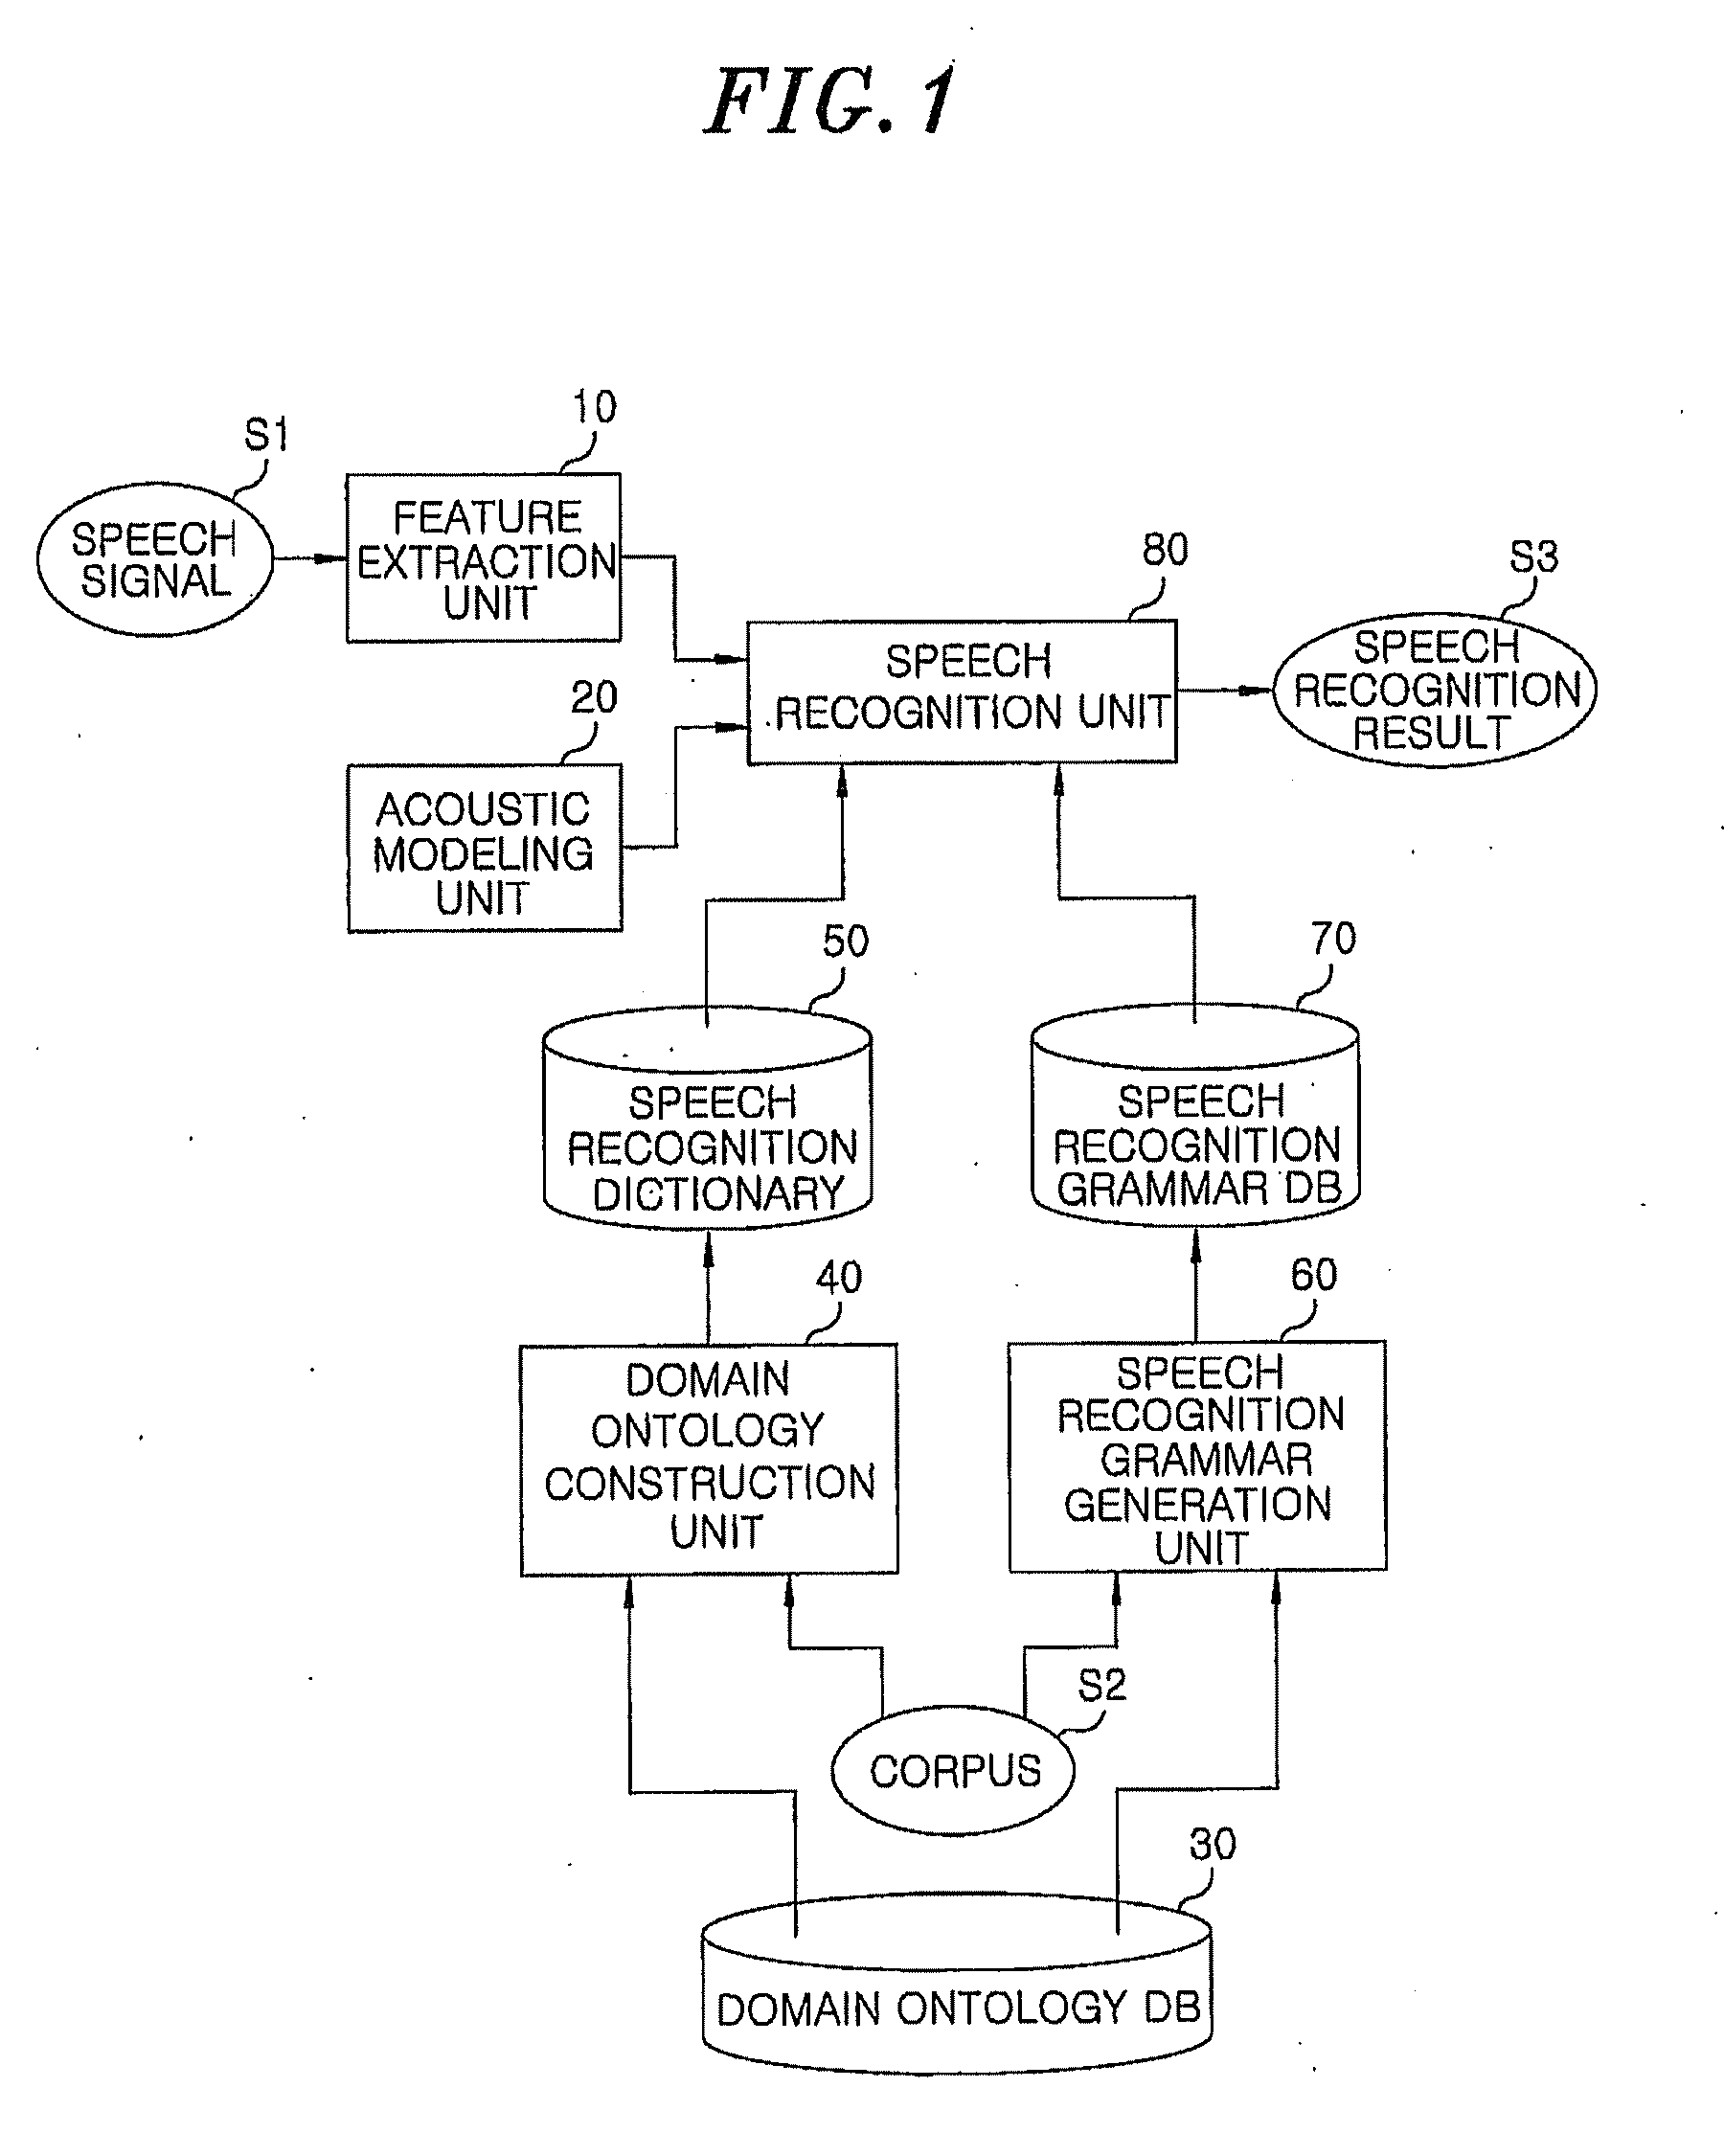 Method and apparatus for speech recognition using domain ontology